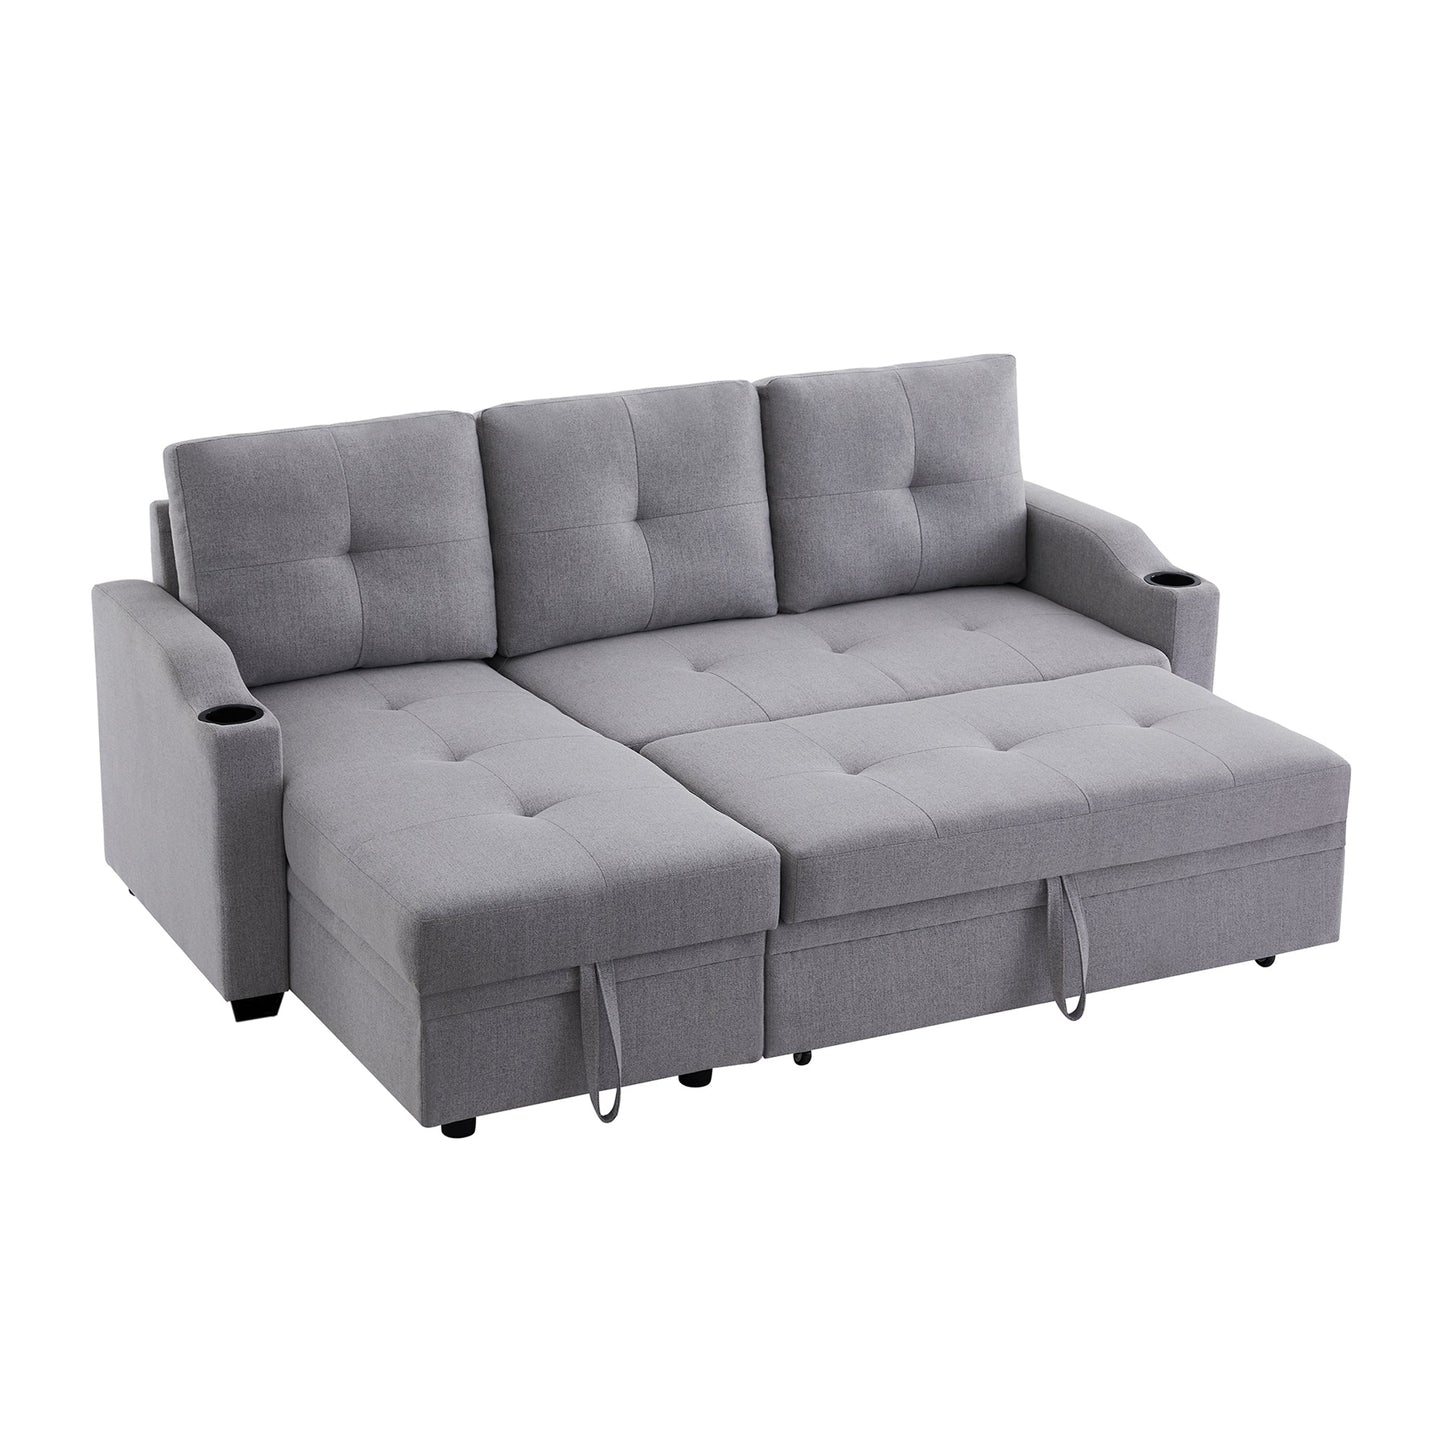 Sleeper Sectional Couch with Storage Chaise and Two Cup Holders Furniture Set Grey - Demine Essentials